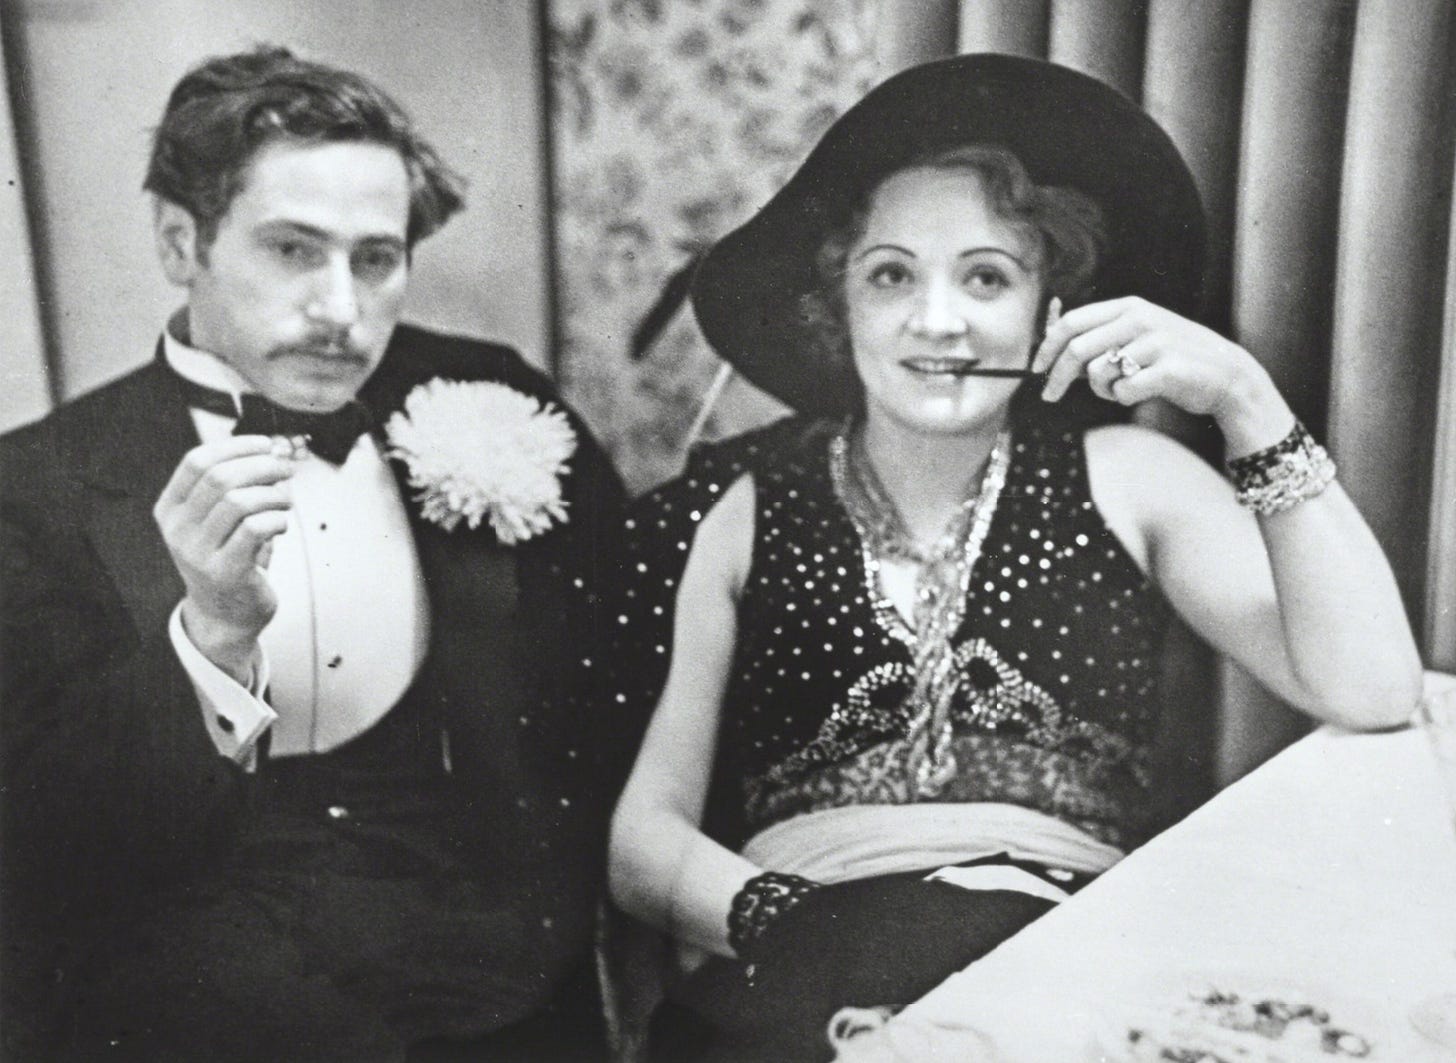 black and white photo of Josef von Sternberg in a tux, smoking a cigarette, sitting next to Marlene Dietrich with her pipe in hand